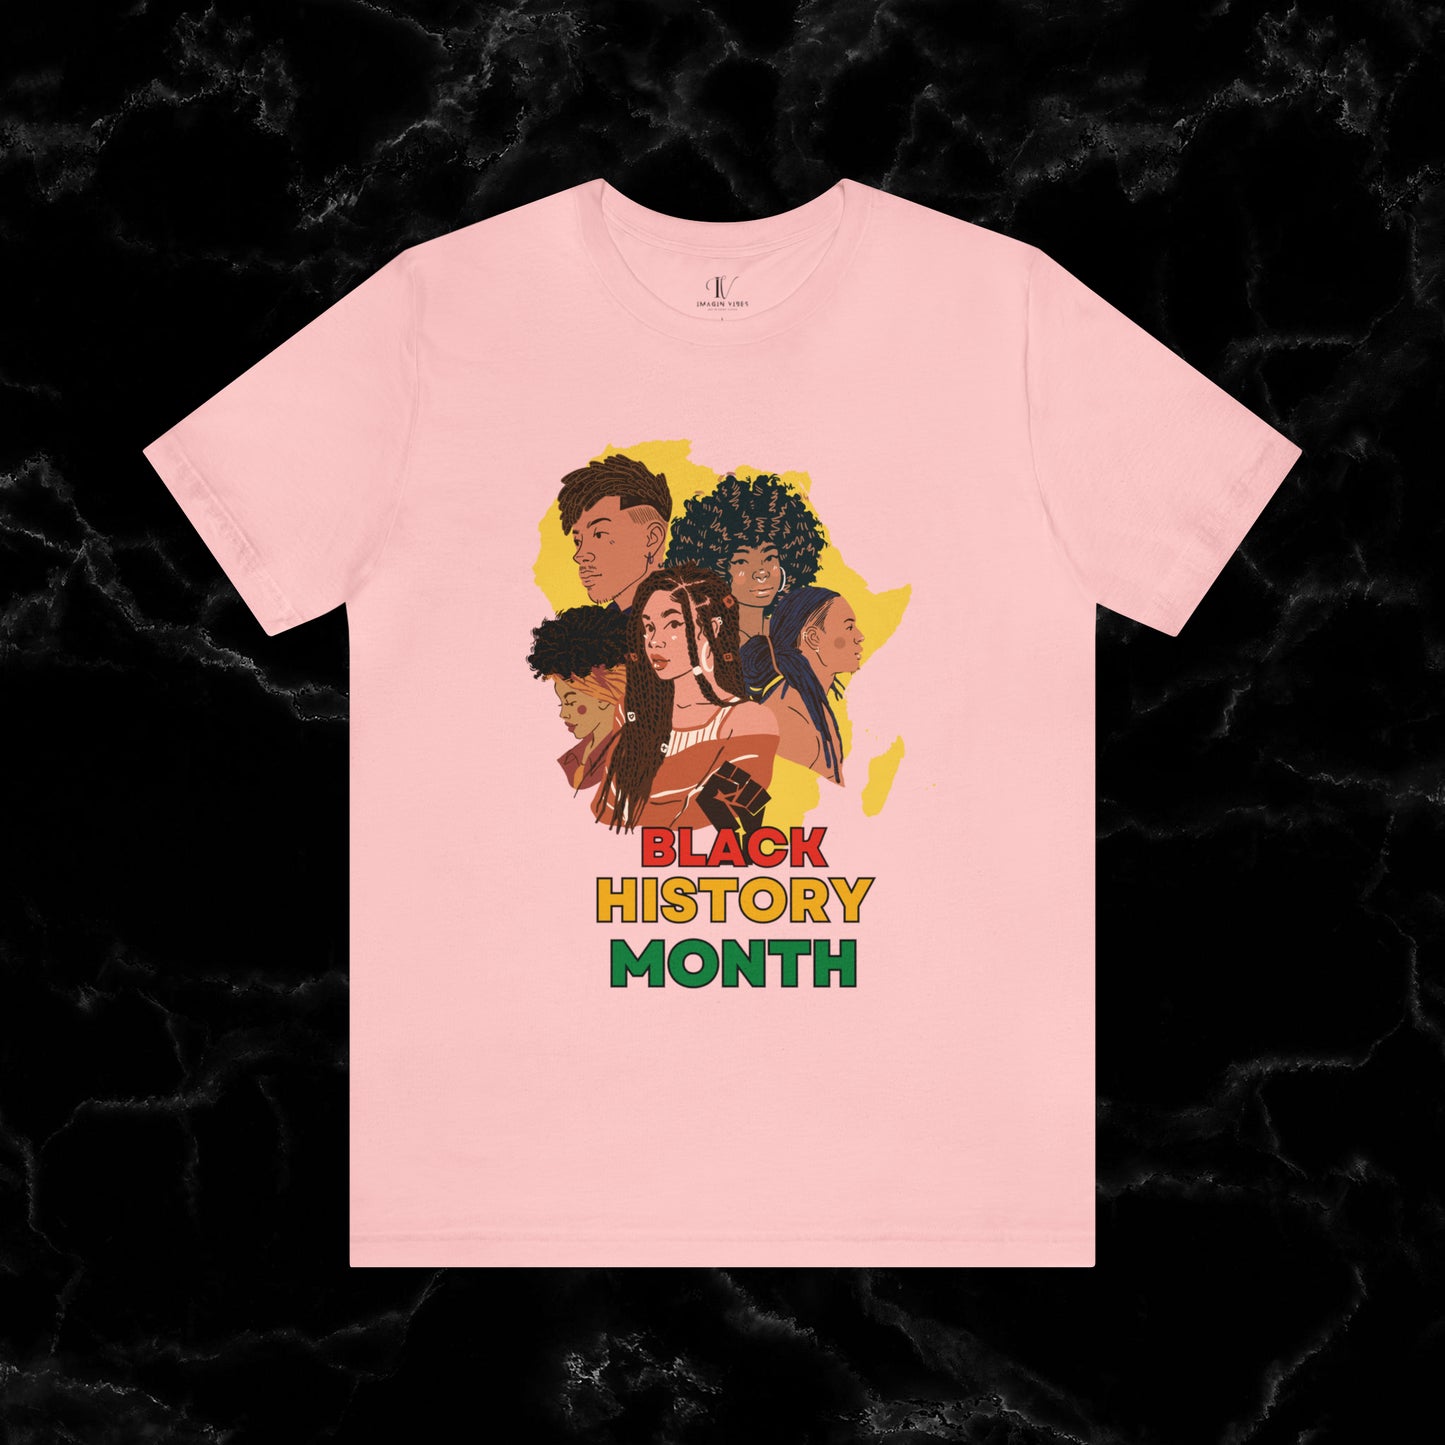 Trendy Black History Month Shirts - Celebrating African American Pride and Heritage T-Shirt Pink XS 